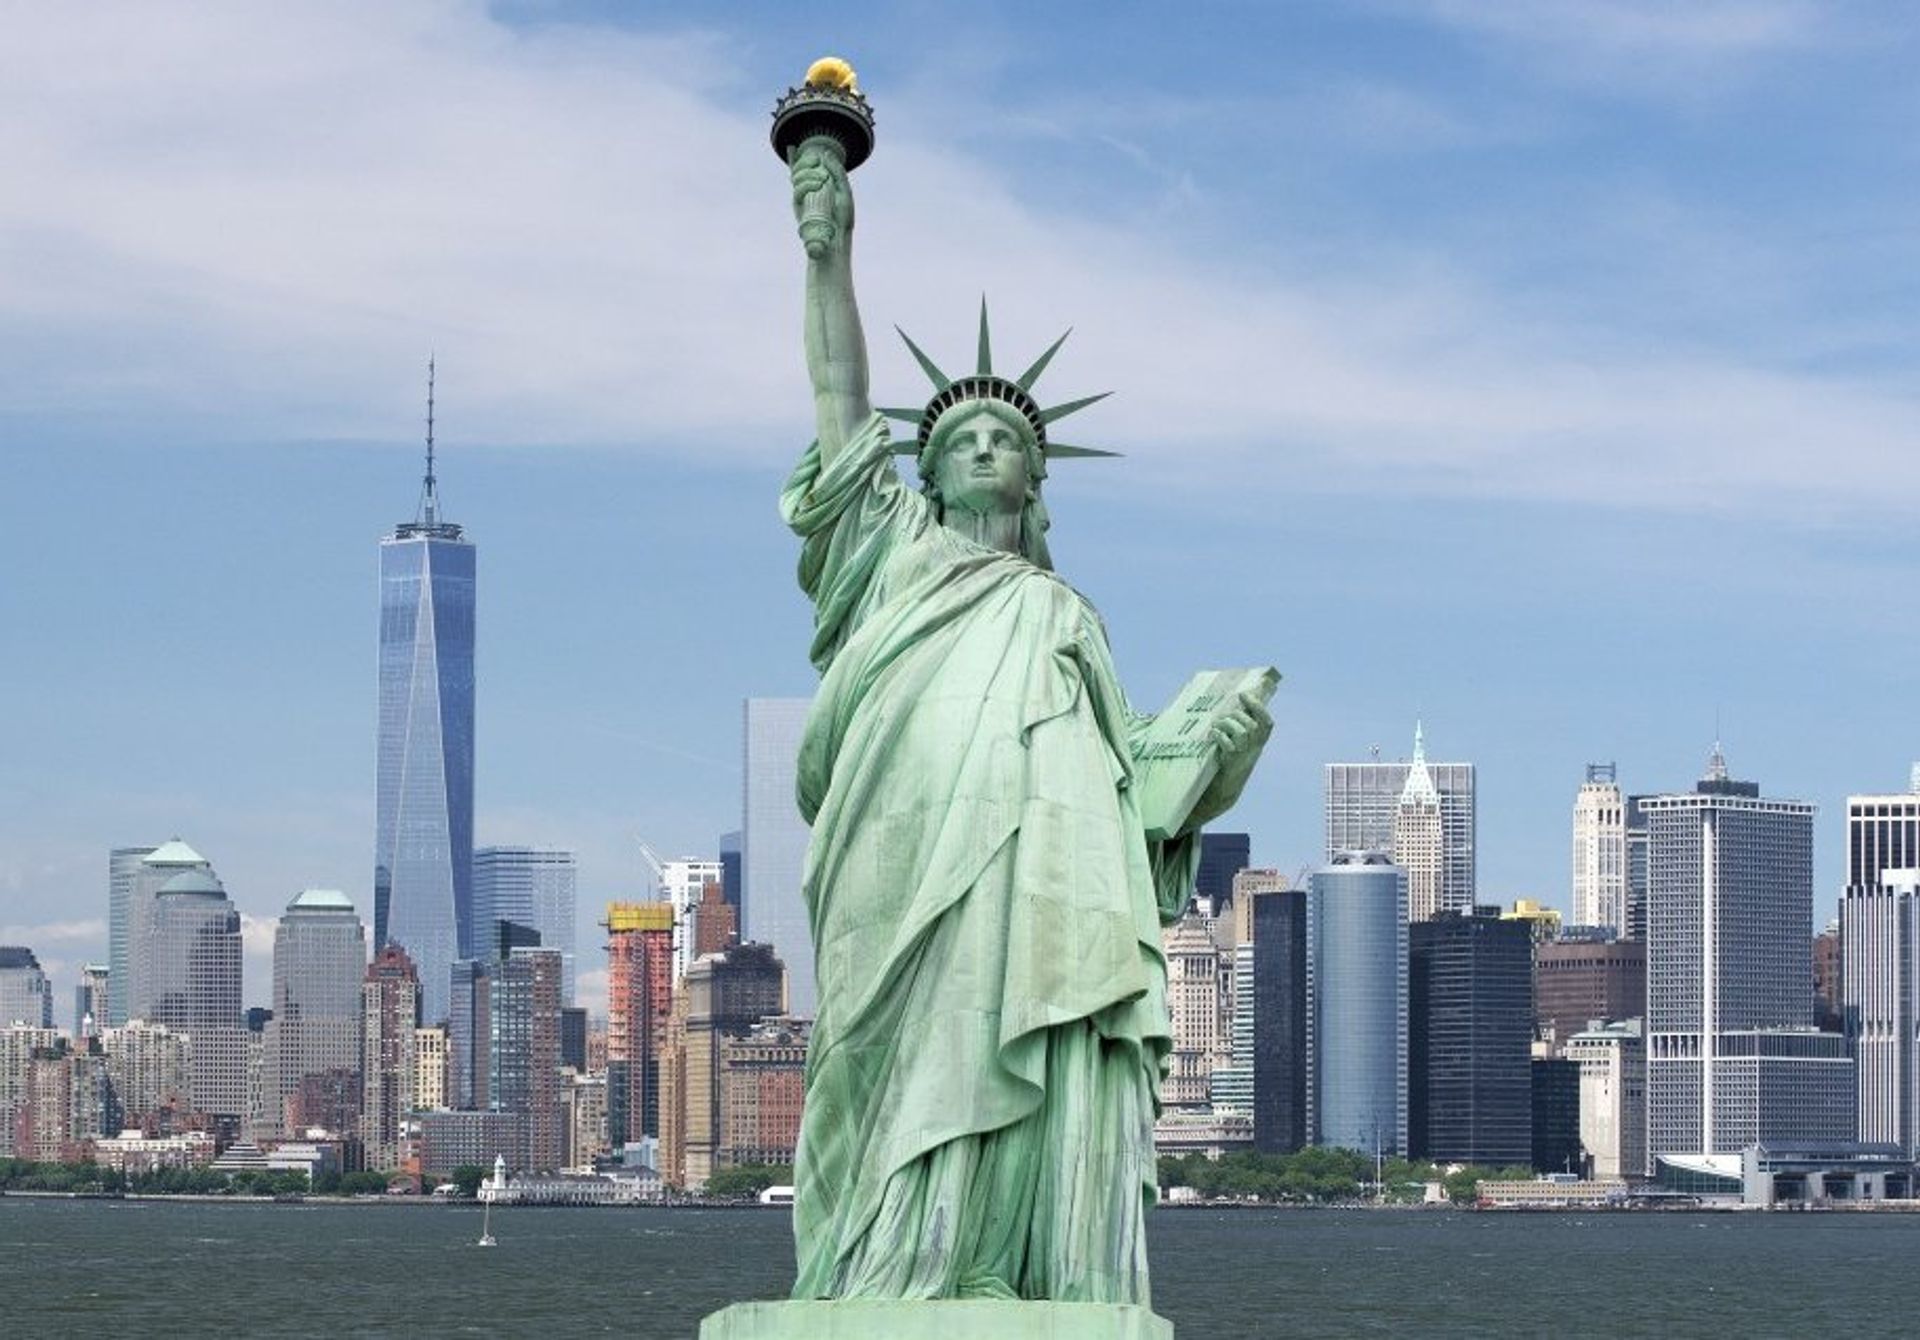 The iconic Statue of Liberty in New York was a gift from France in 1886!